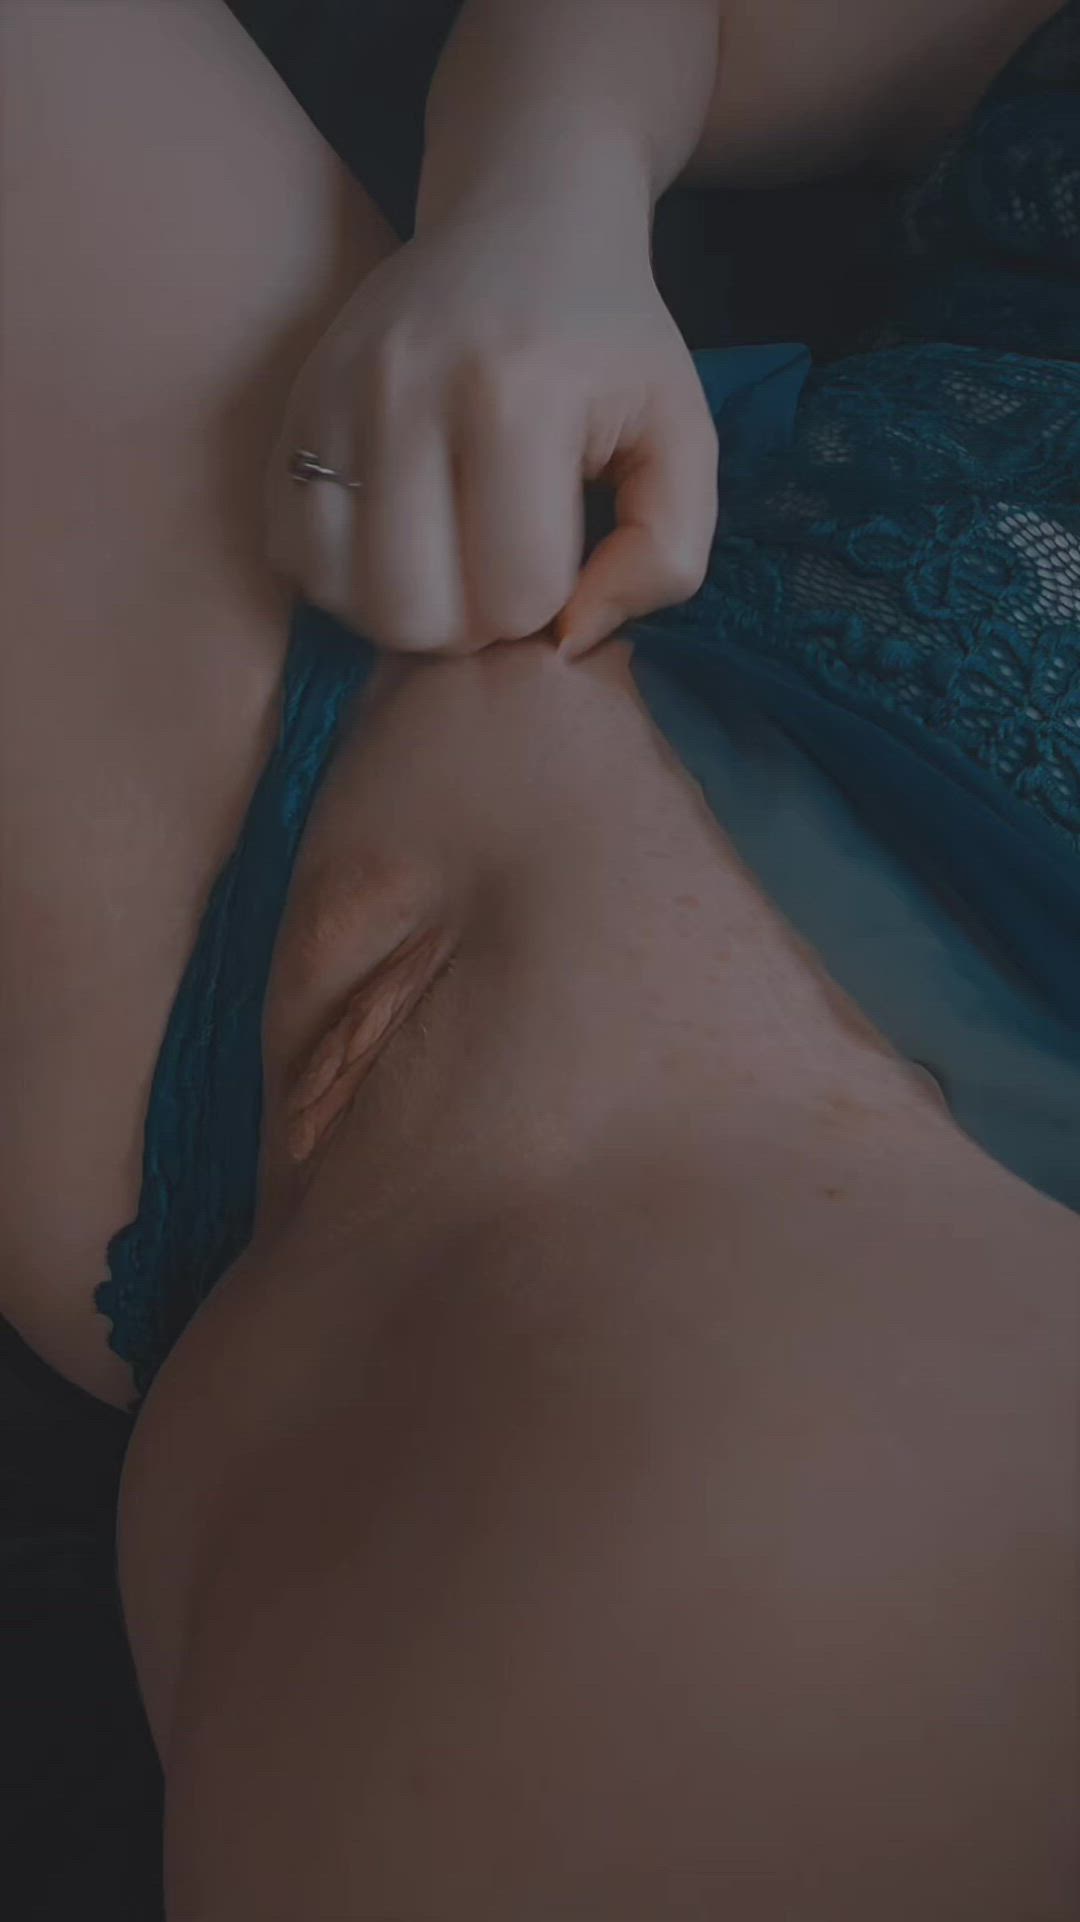 Pussy porn video with onlyfans model ✿༺ 𝑀𝓊𝓈𝒽𝓇𝑜𝑜𝓂𝒷𝓊𝓂𝓅𝒶 ༻✿ <strong>@mumflr_morp</strong>